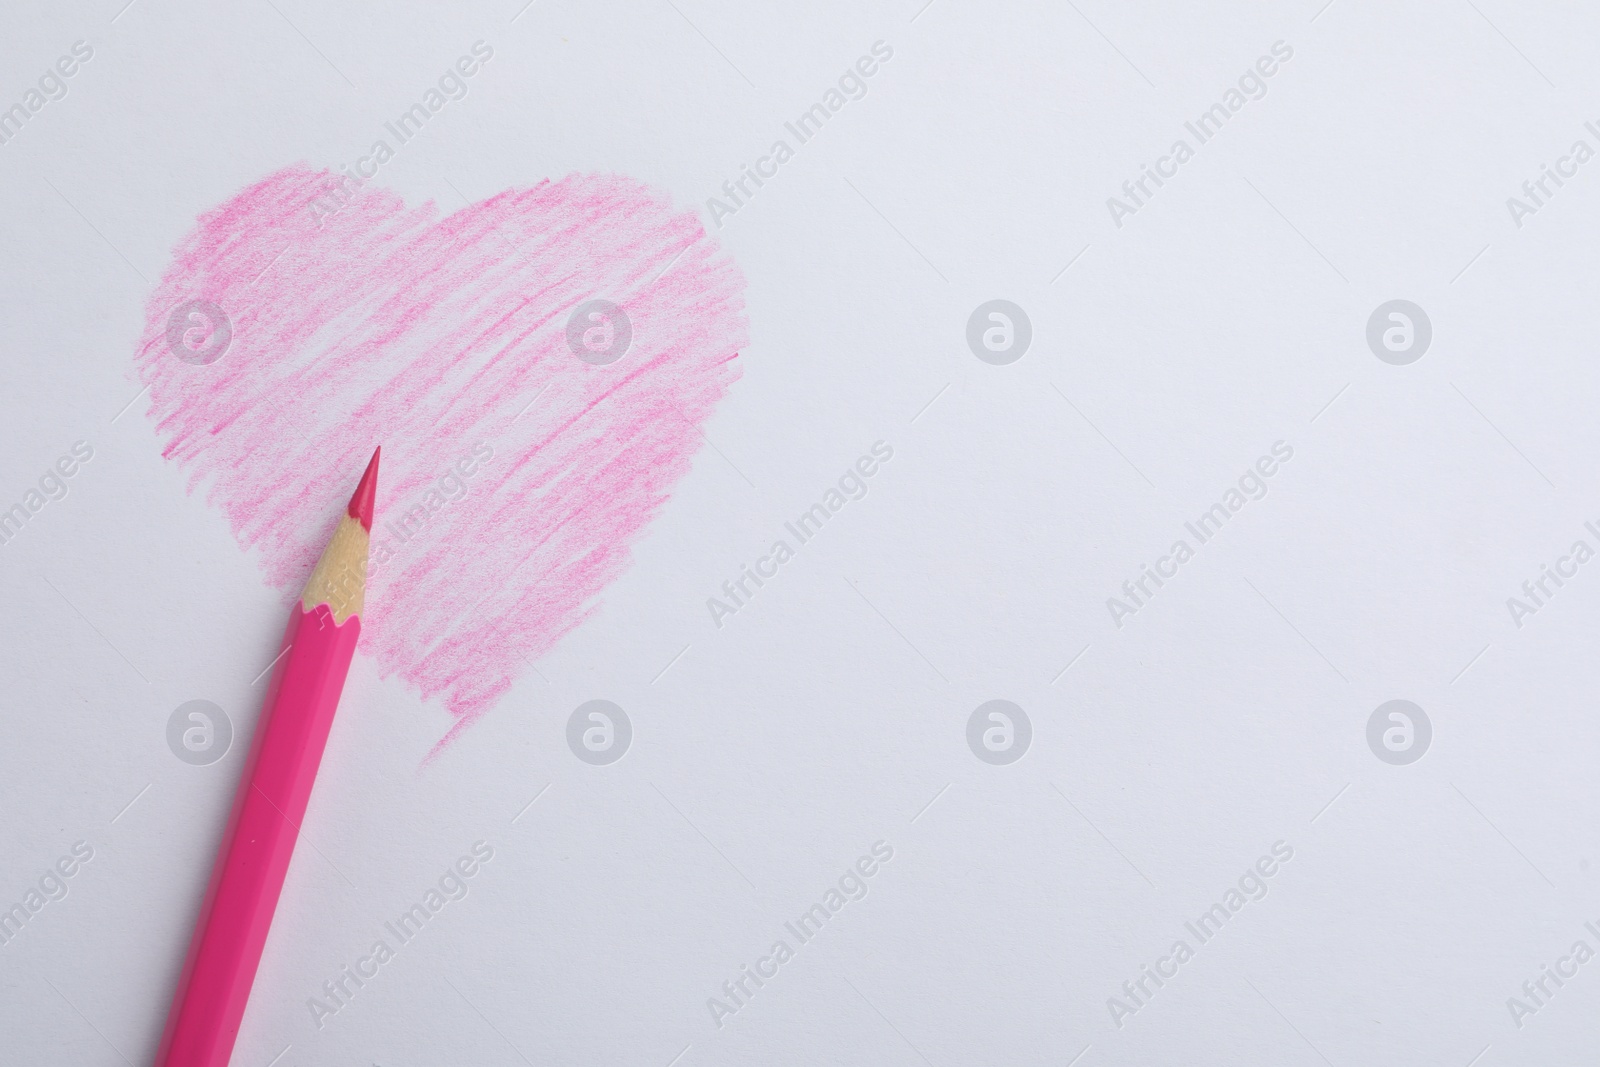 Photo of Drawing of heart and pink pencil on white background, top view